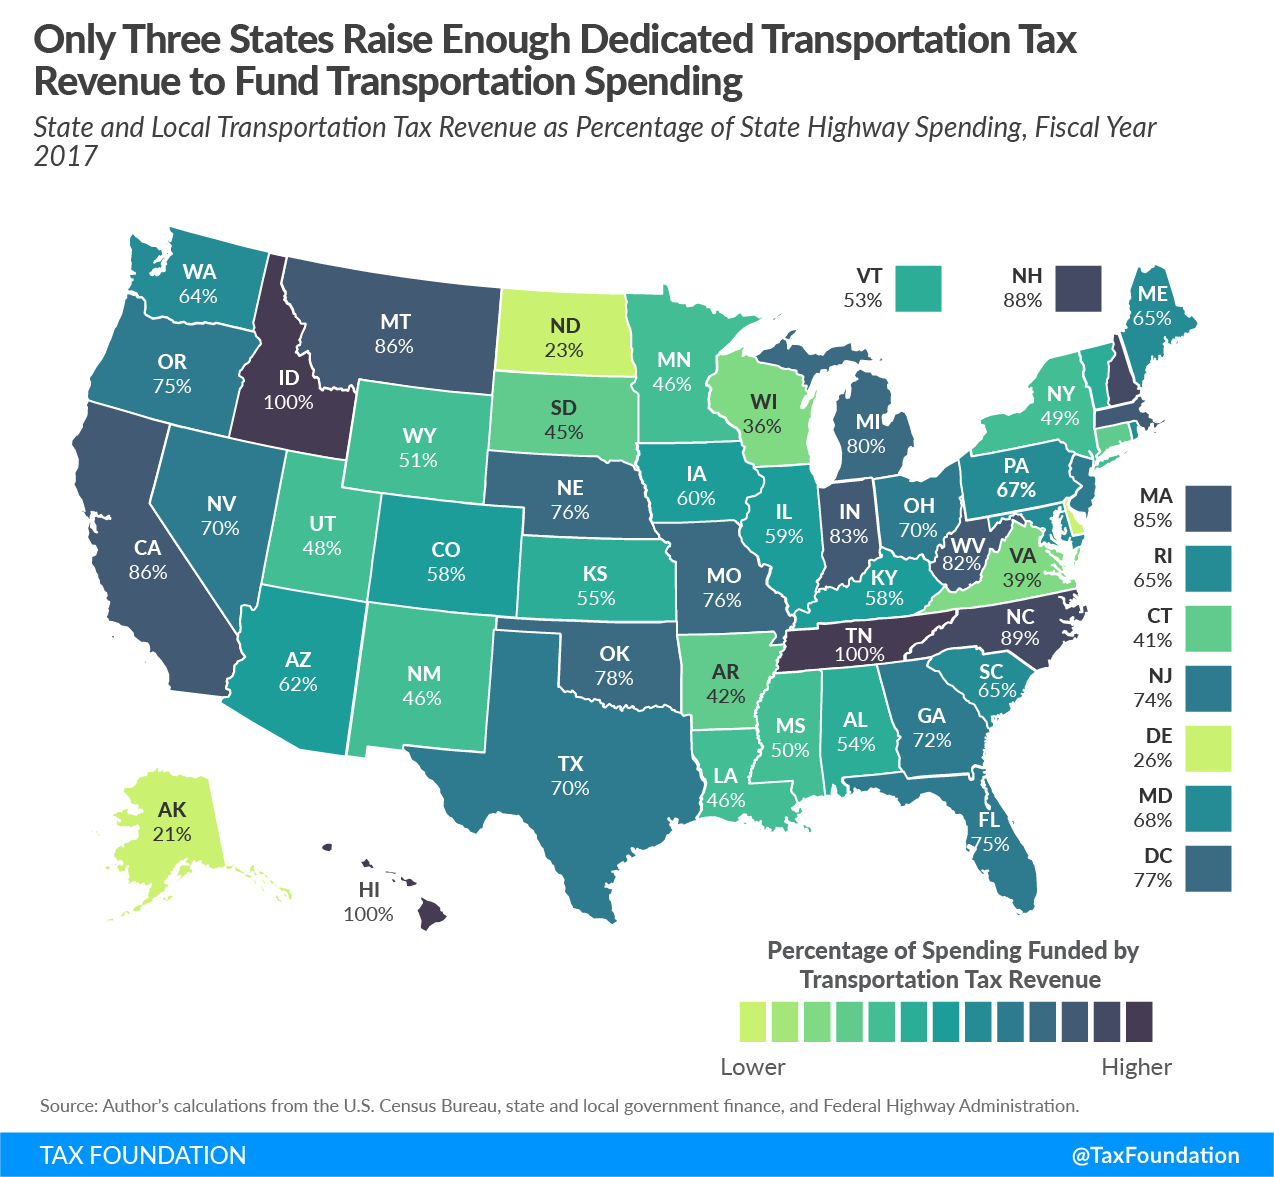 Only three states raise enough dedicated transportation revenue to fund transportation spending